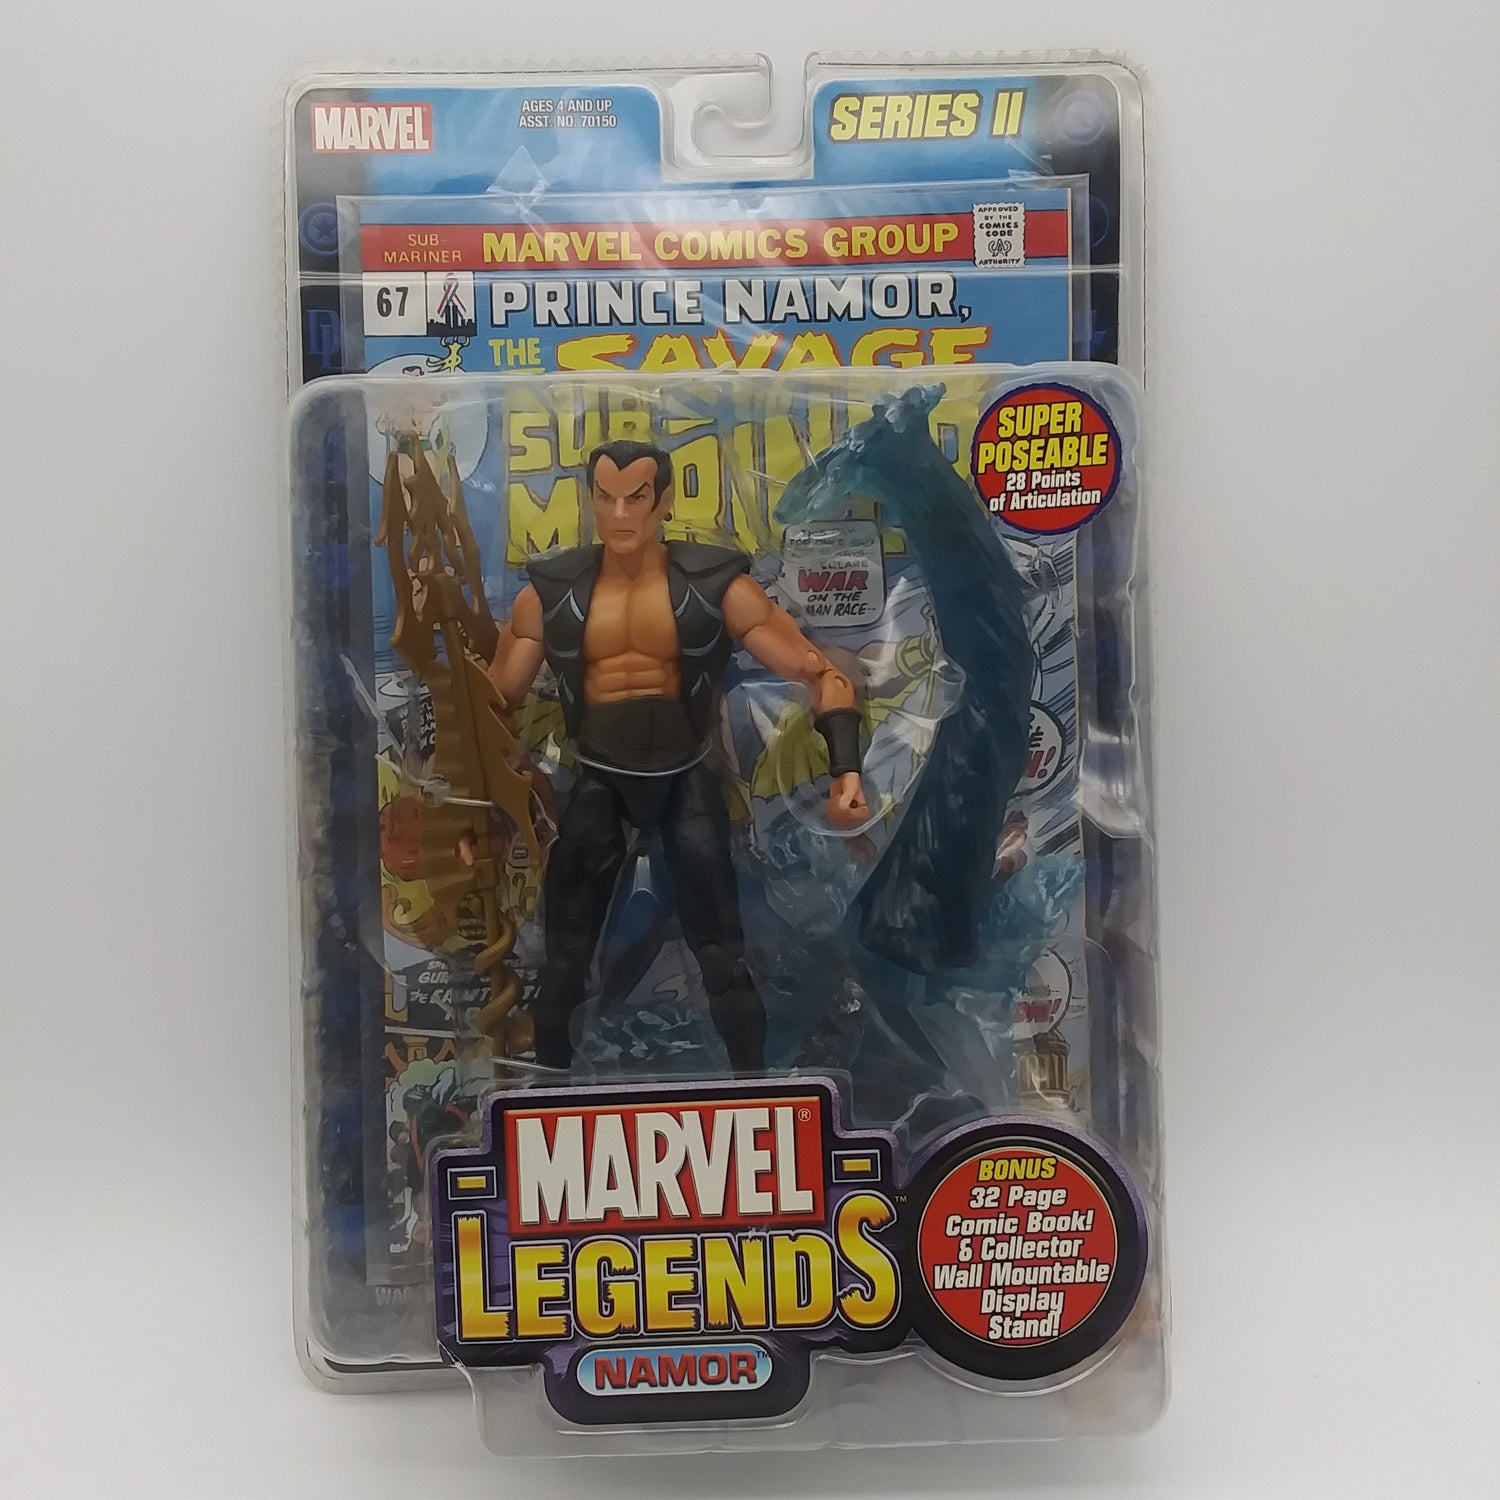 The front of the box and bubble. The bubble is sealed, the action figure inside is white with black hair, wearing a dark blue vest and dark blue pants. He's holding a golden trident.